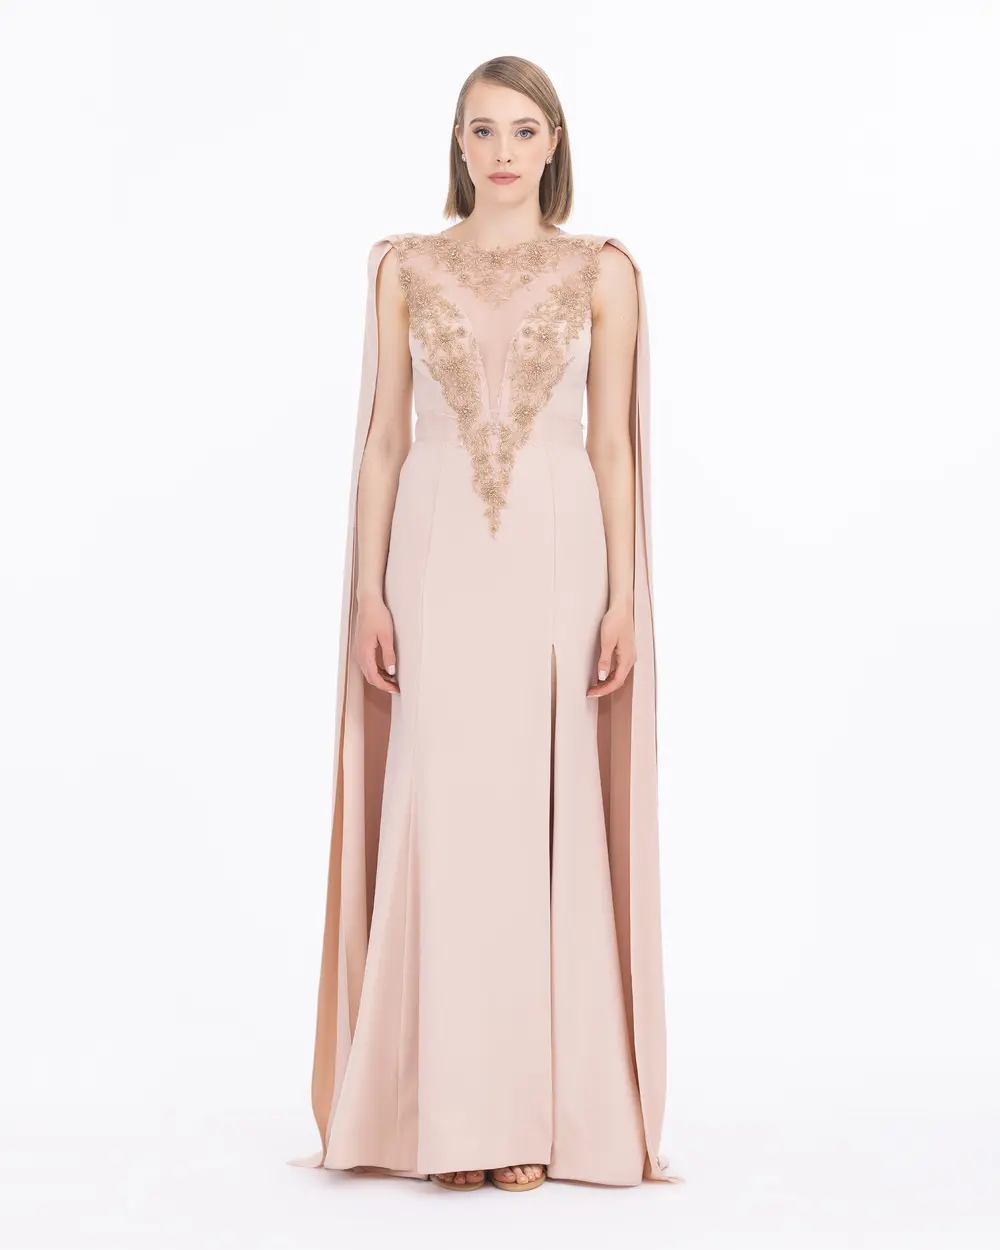 Crepe Fabric Slit Evening Dress with Indian Accessories